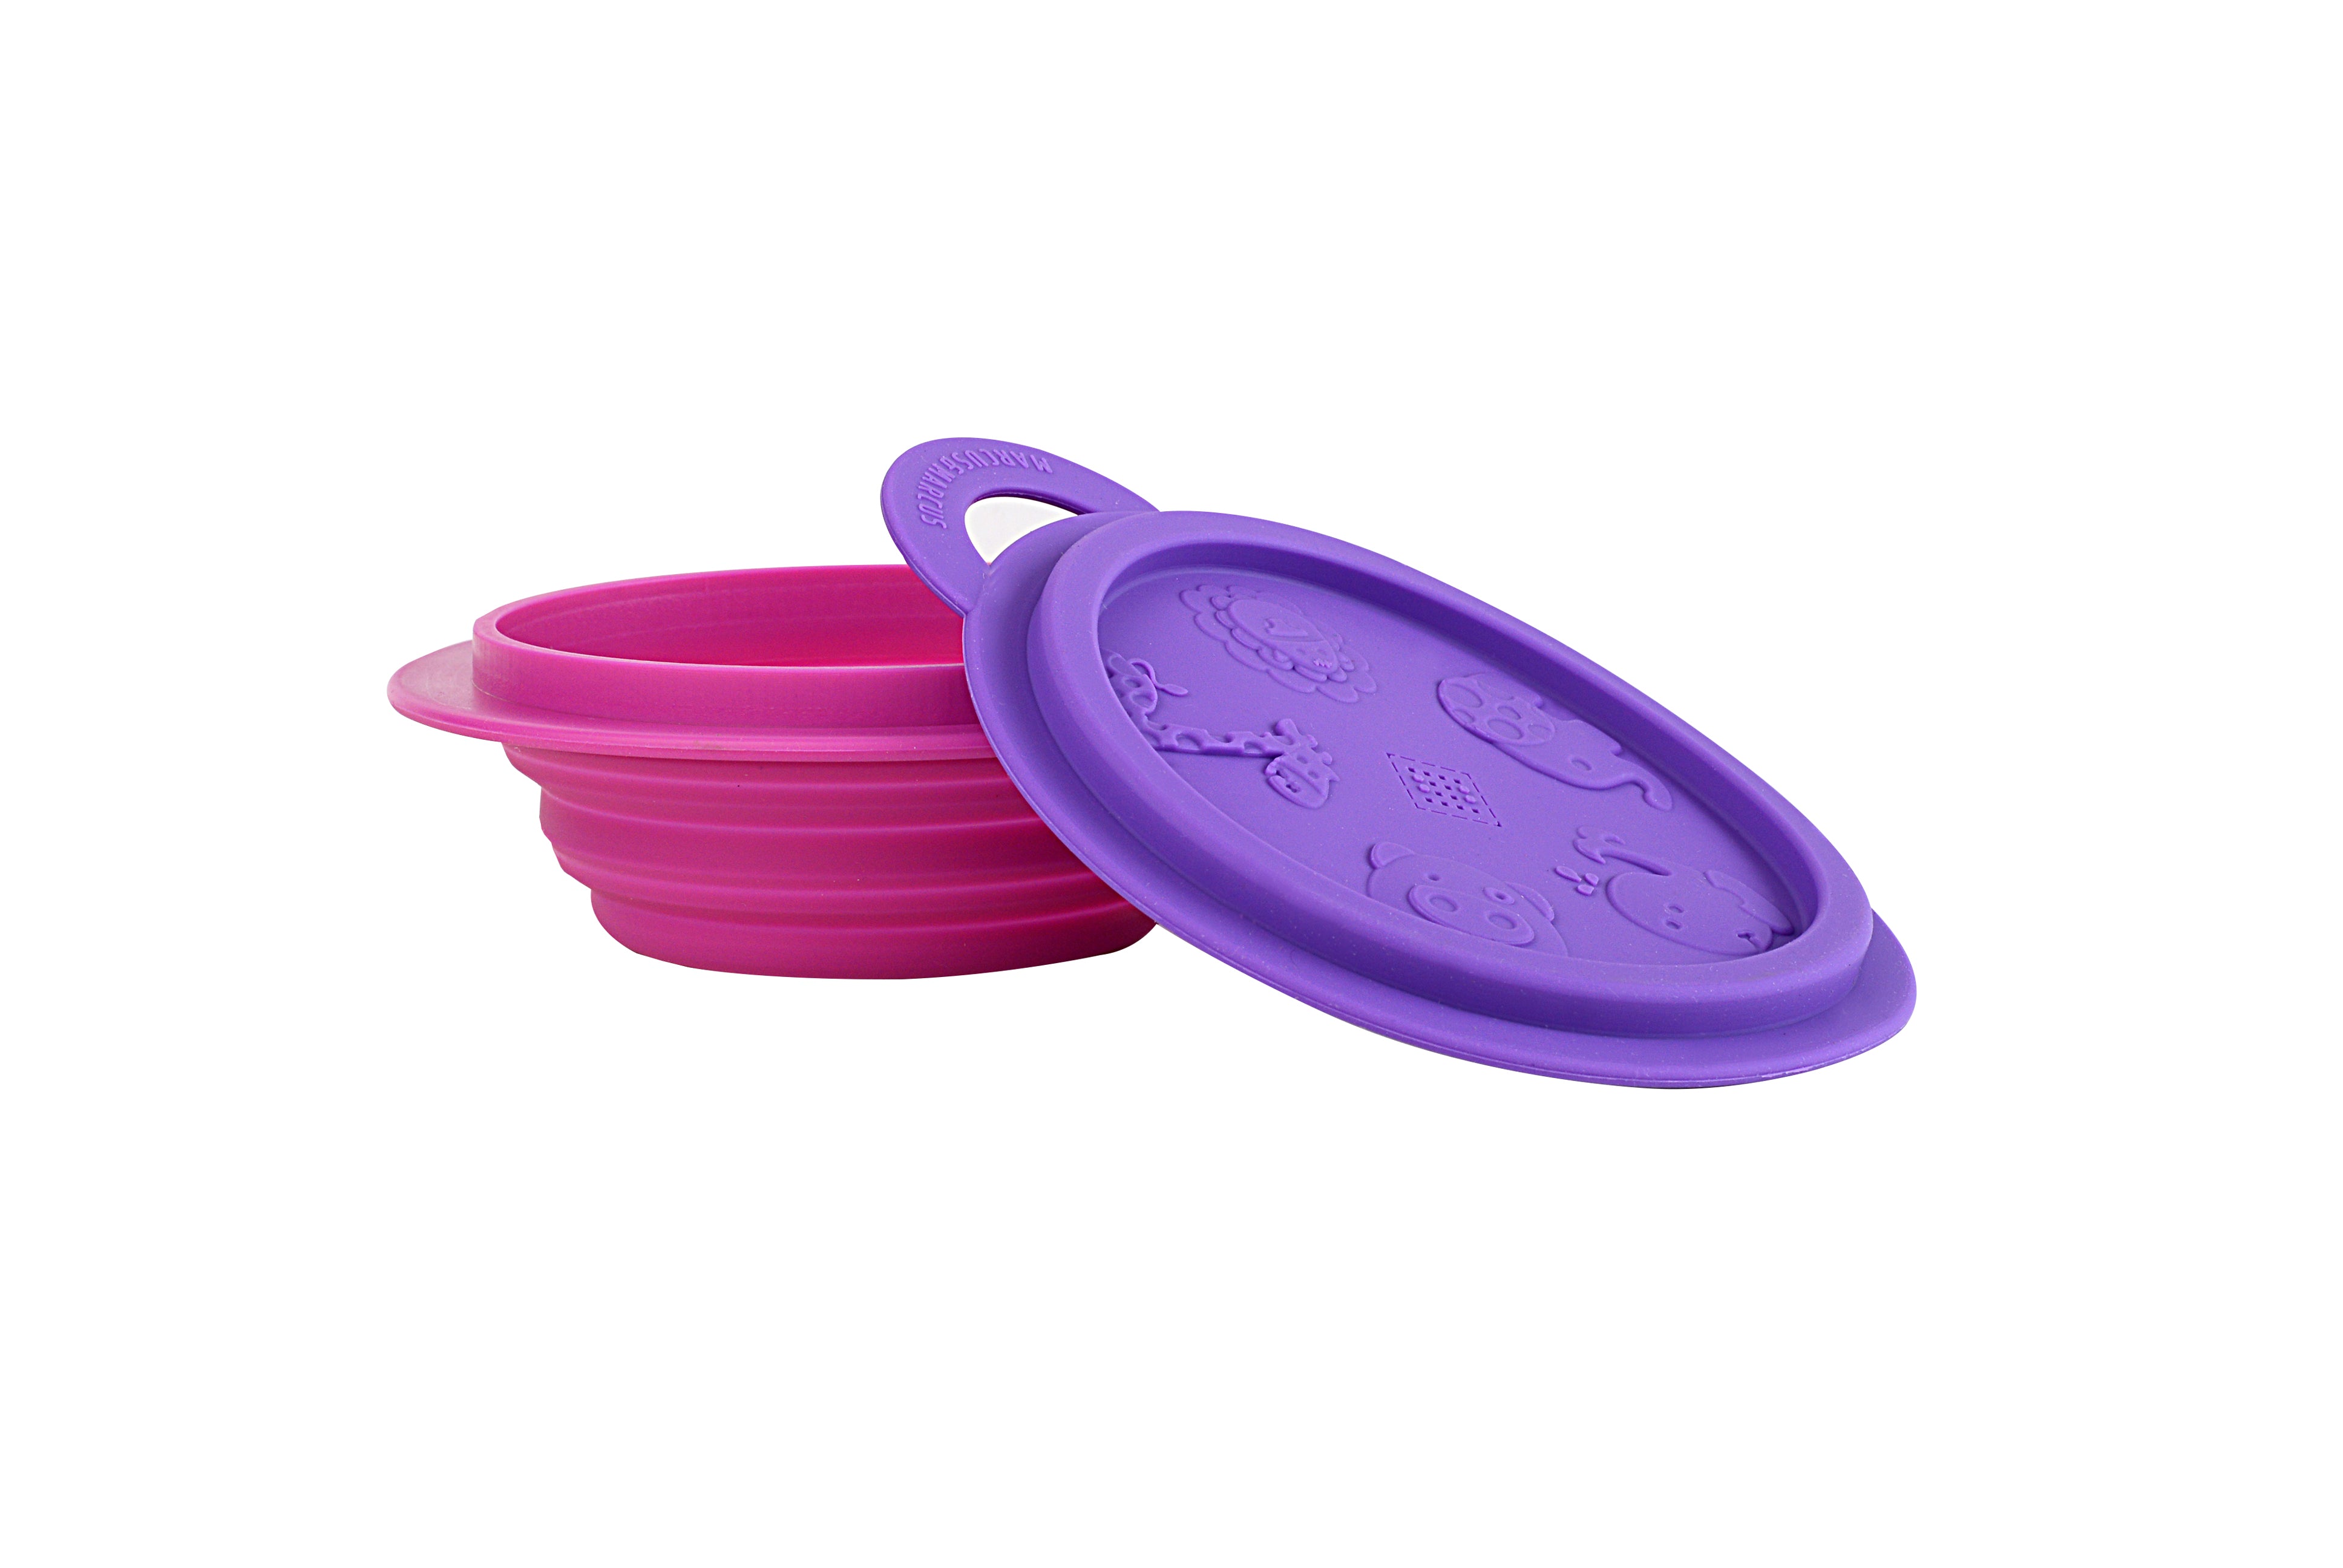 Collapsible Bowls – 6packpetsupplies